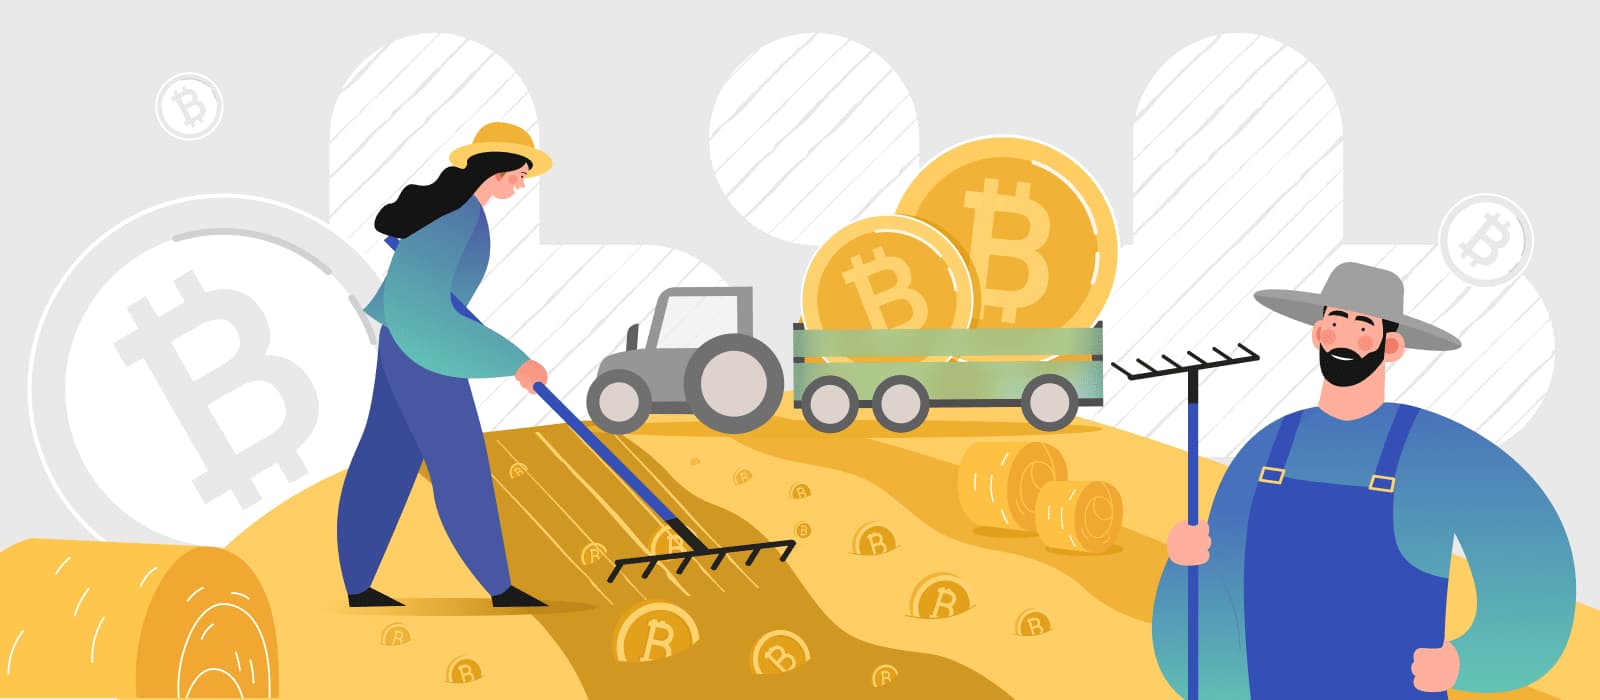 Two people harvesting bitcoin tokens in the field